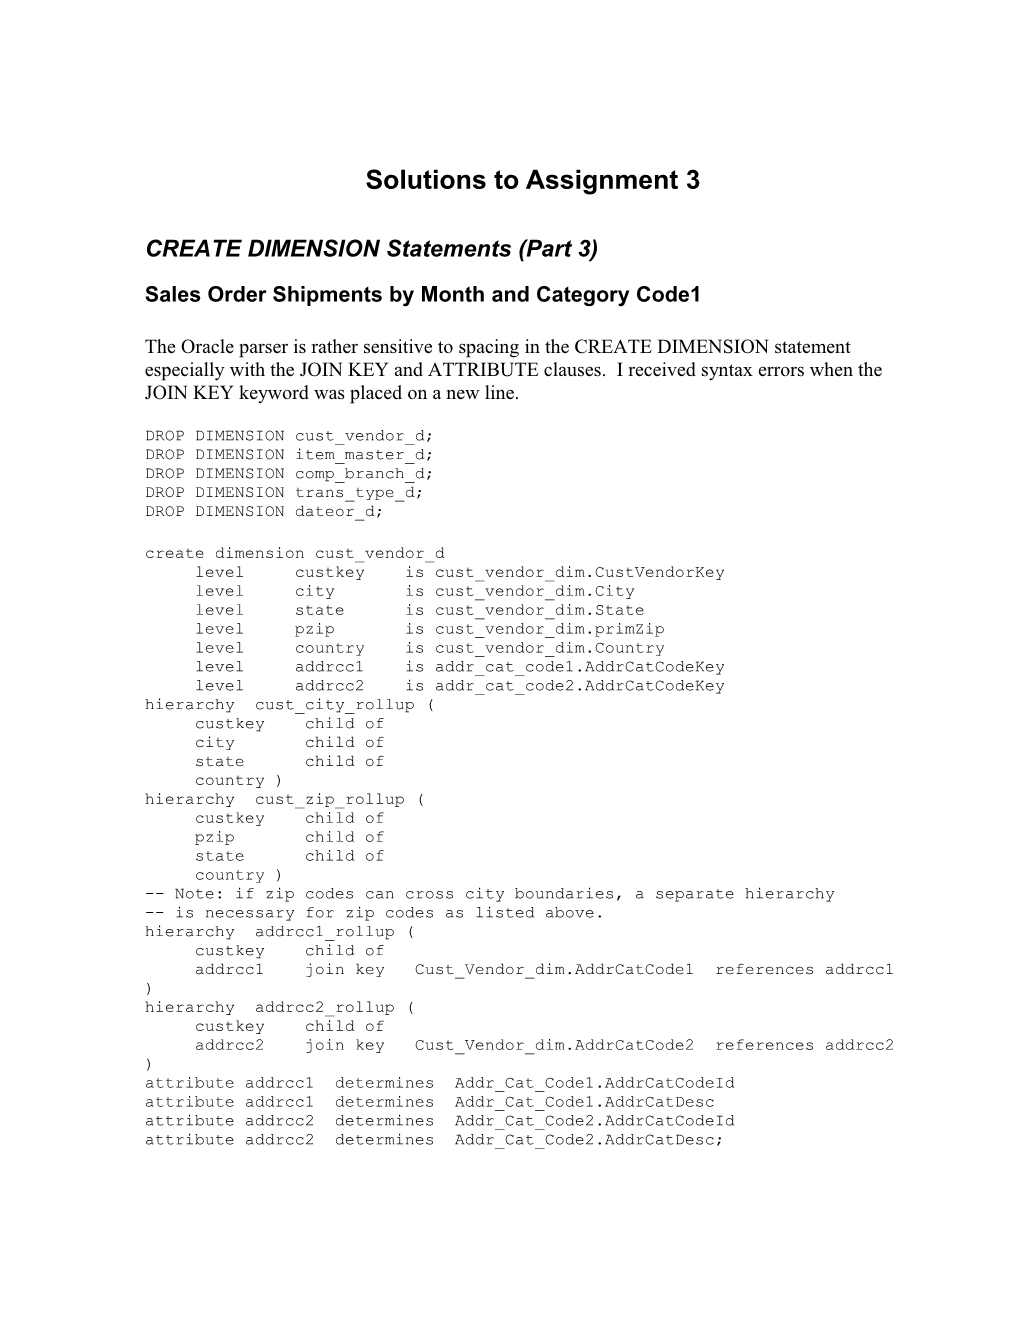 Solutions to Assignment 4